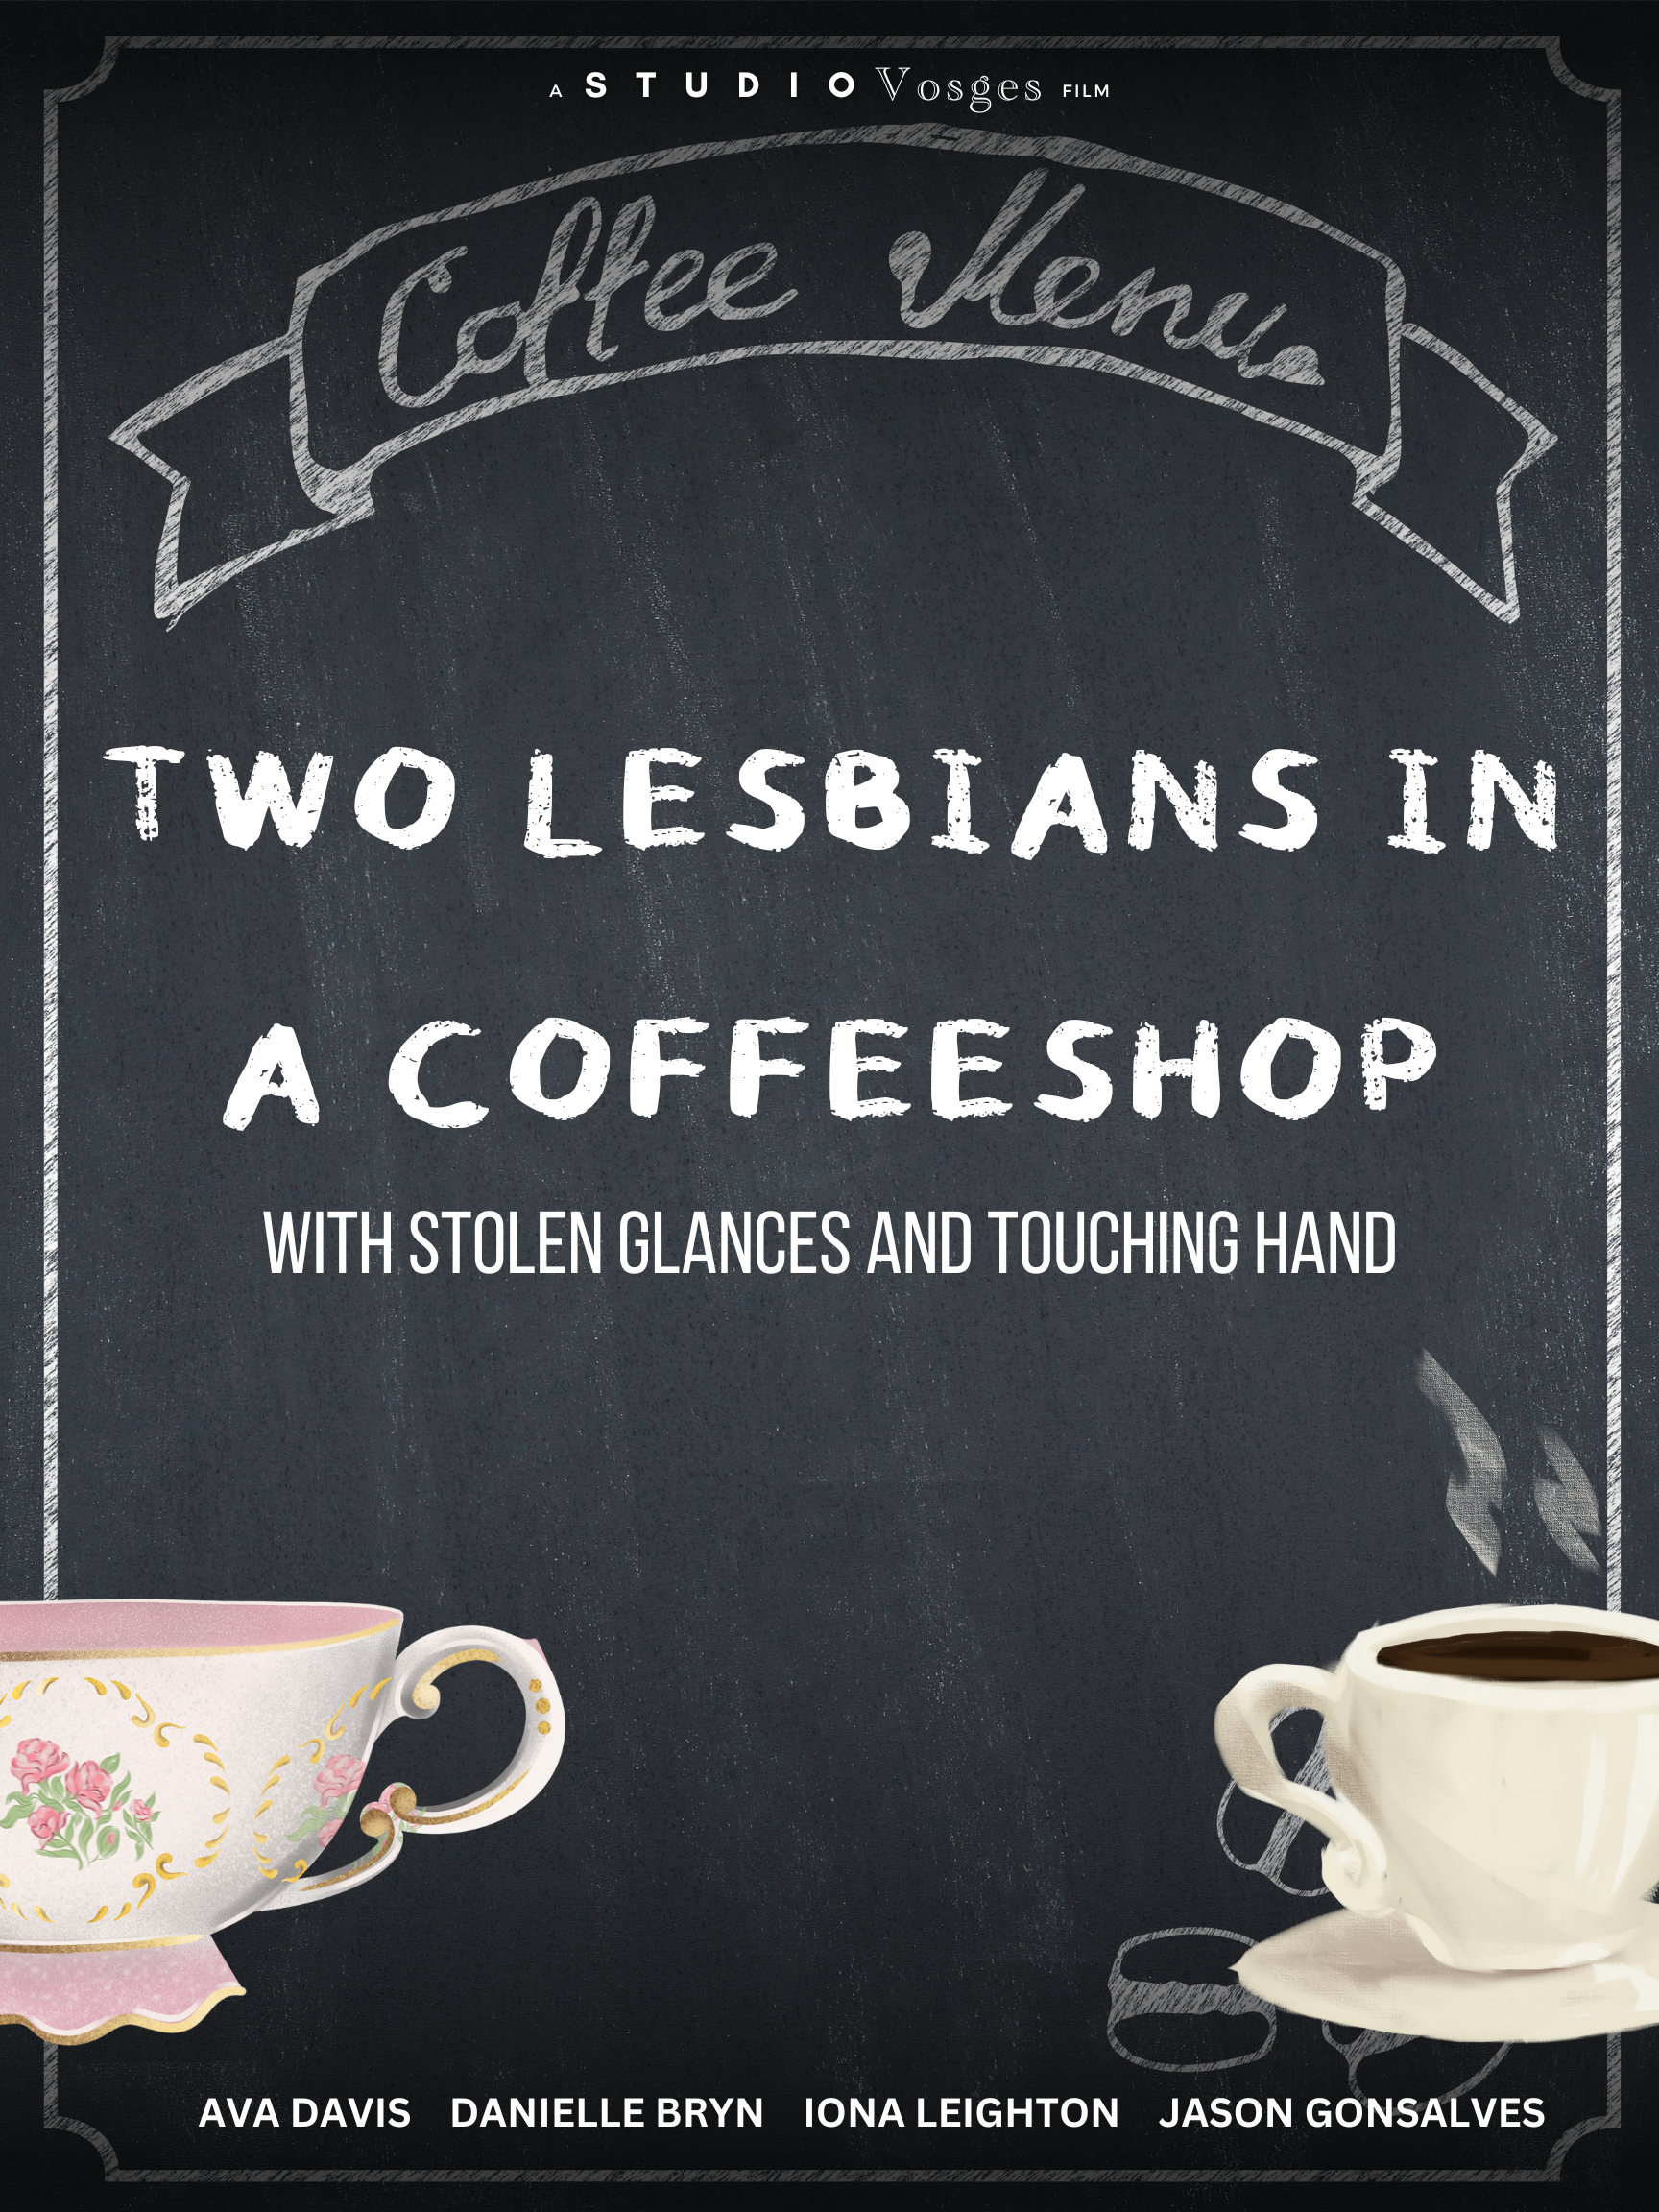 poster_Two Lesbians in a Coffeeshop (1).png